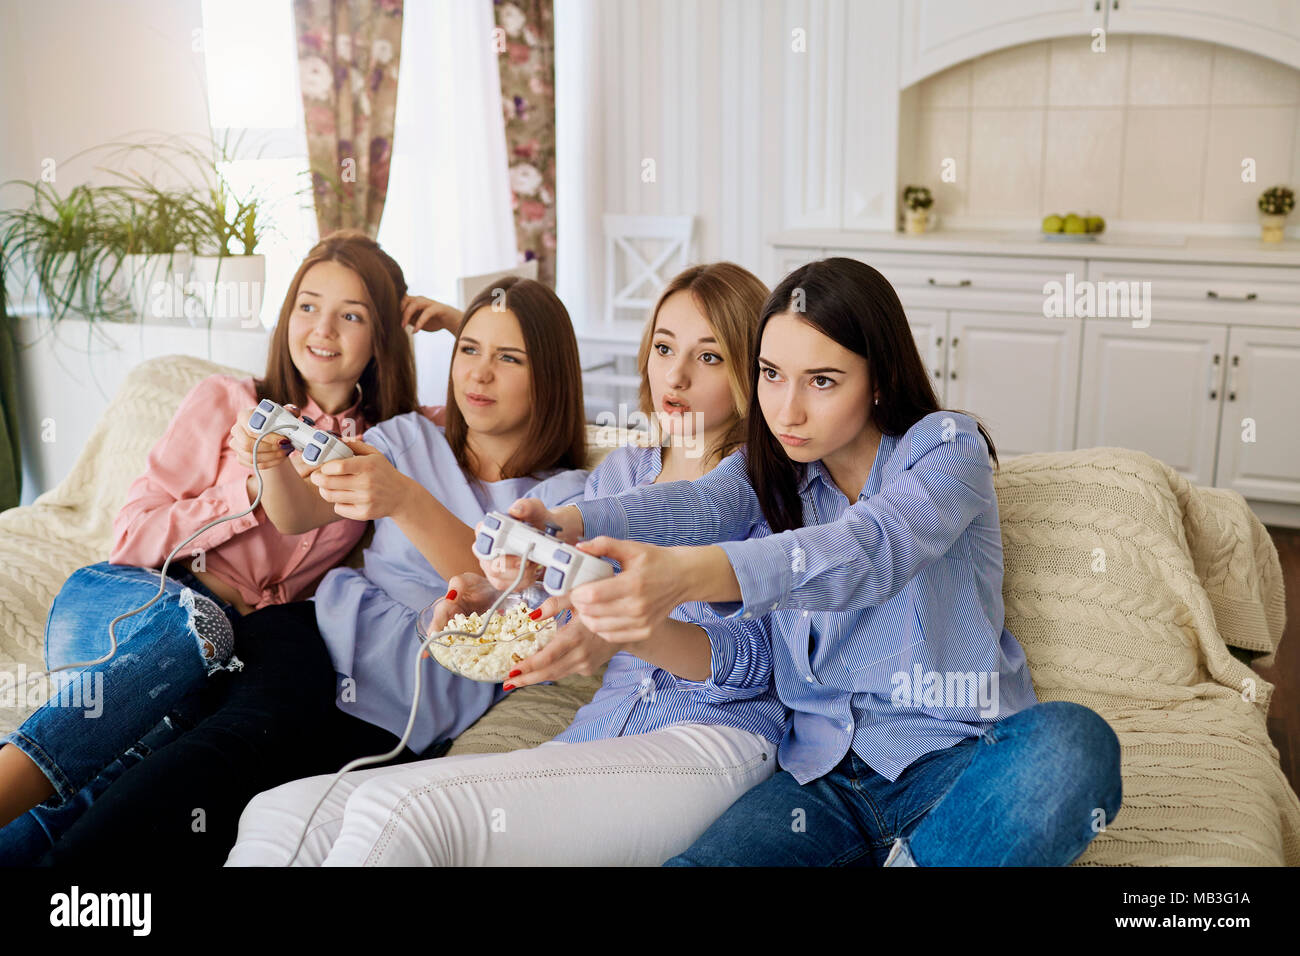 Girlfriends are playing video games sitting on the couch in the room. Stock Photo